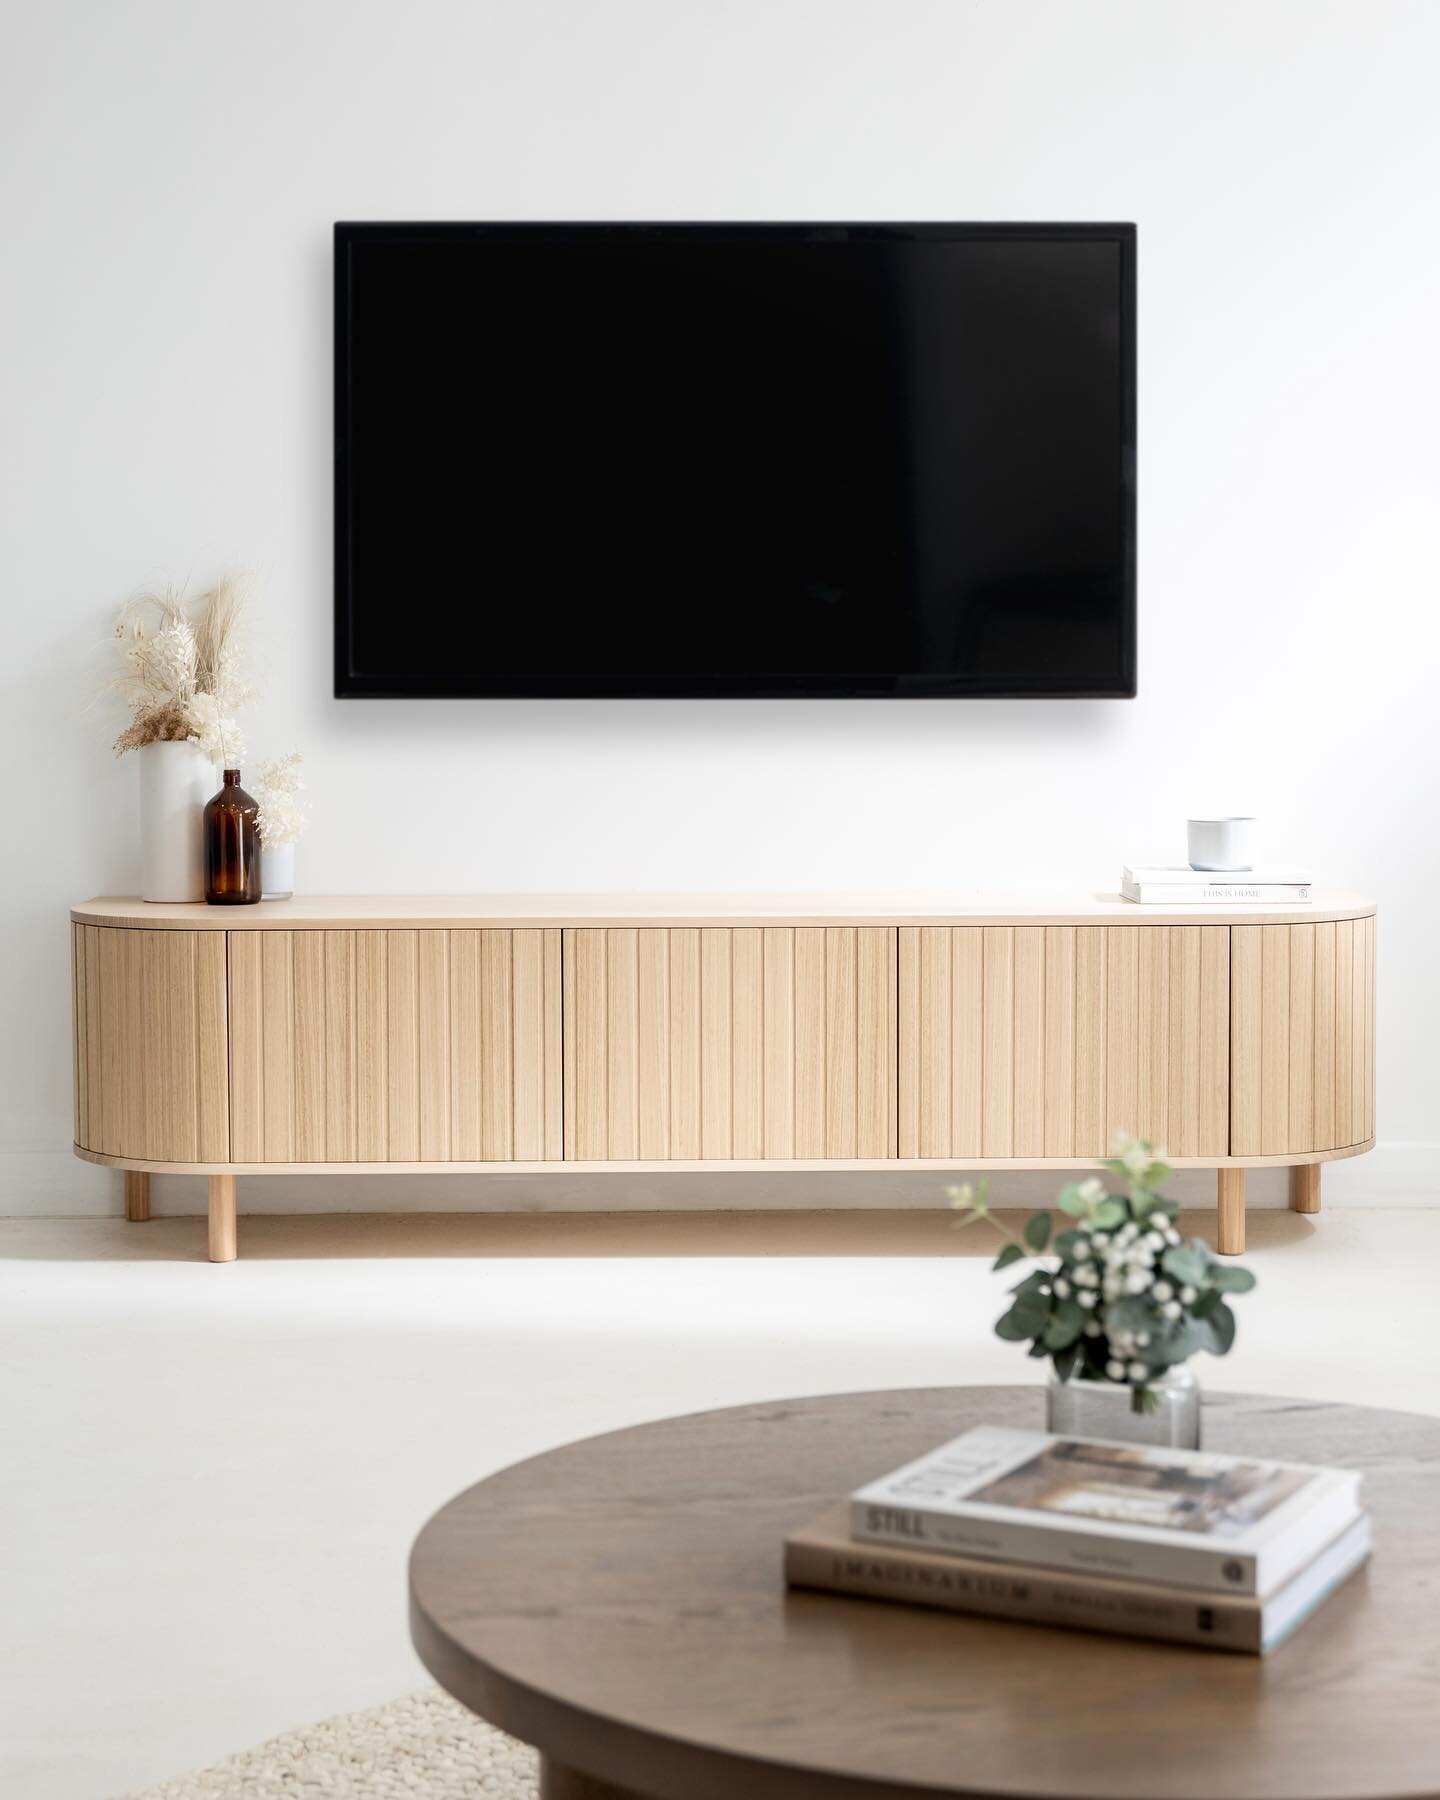 Basque Credenza
This unit is available with different options to suit your home &amp; purpose, whether it&rsquo;s an Entertainment Unit, Sideboard or Buffet...

Options:
Floating or Free Standing / Floating Top or Topless / Rebated Doors or Flush Doo